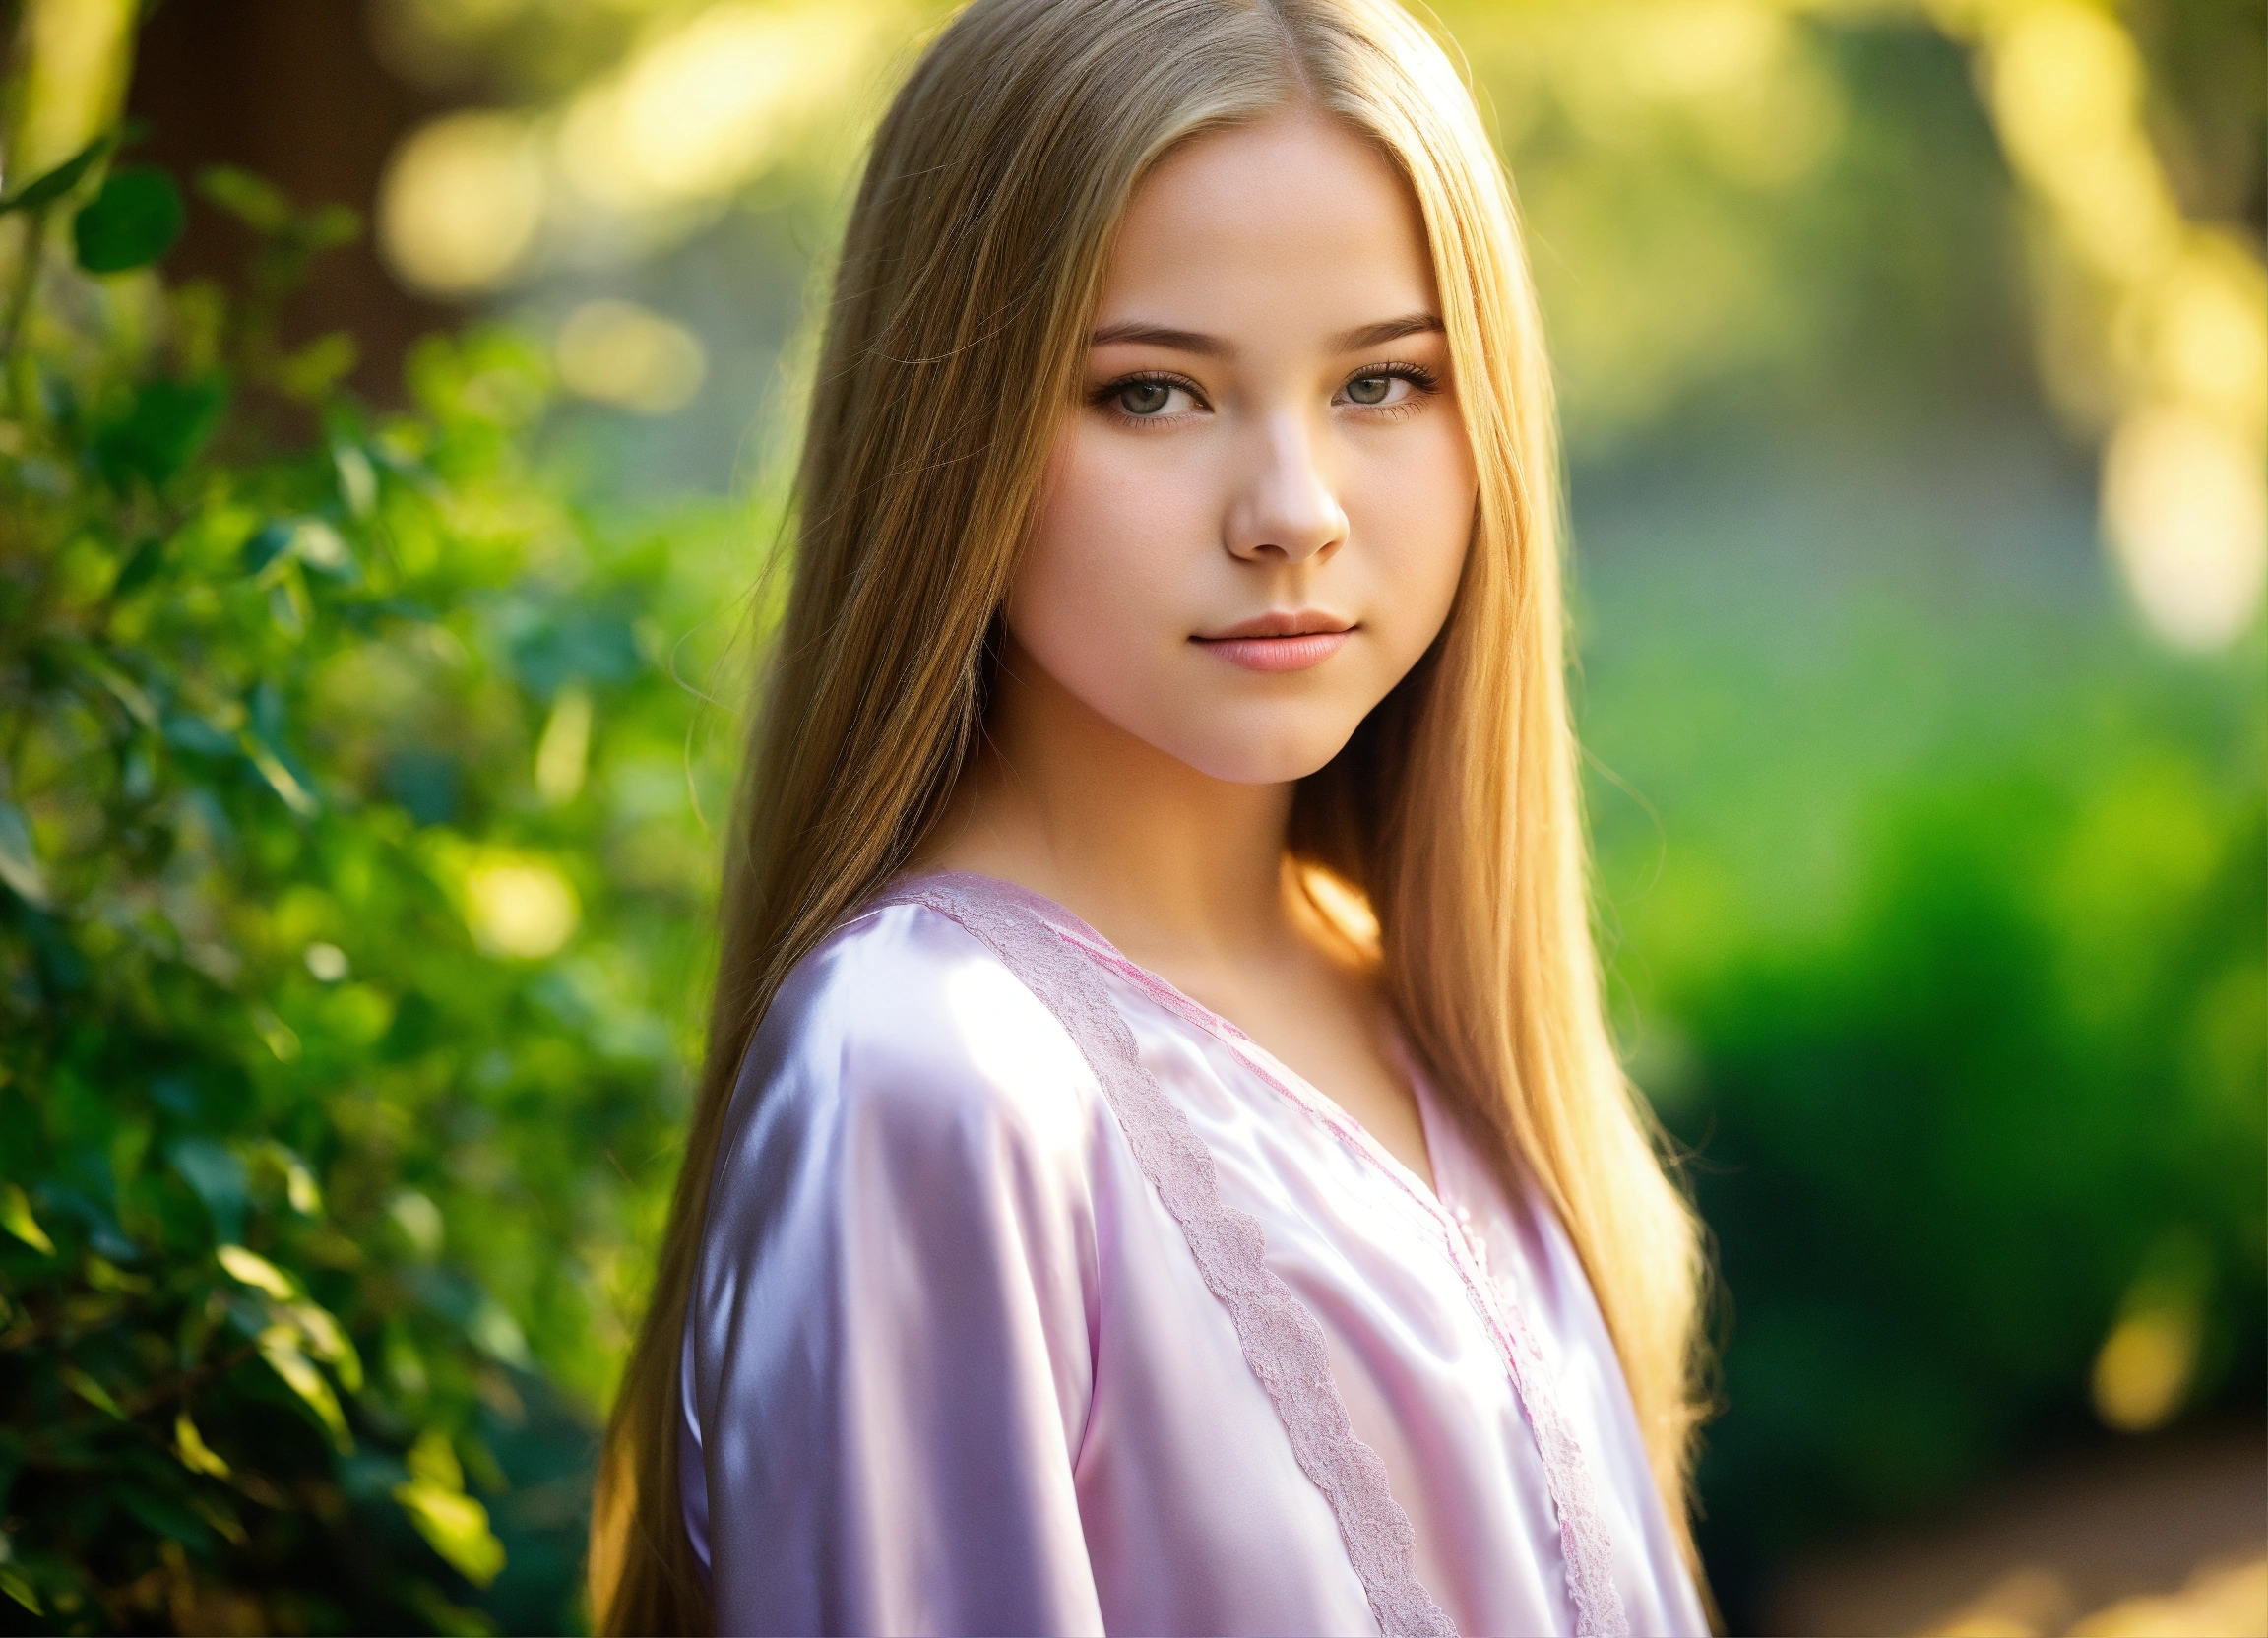 Lexica - Very pretty tween blonde girl, straight hair, centre parting ...